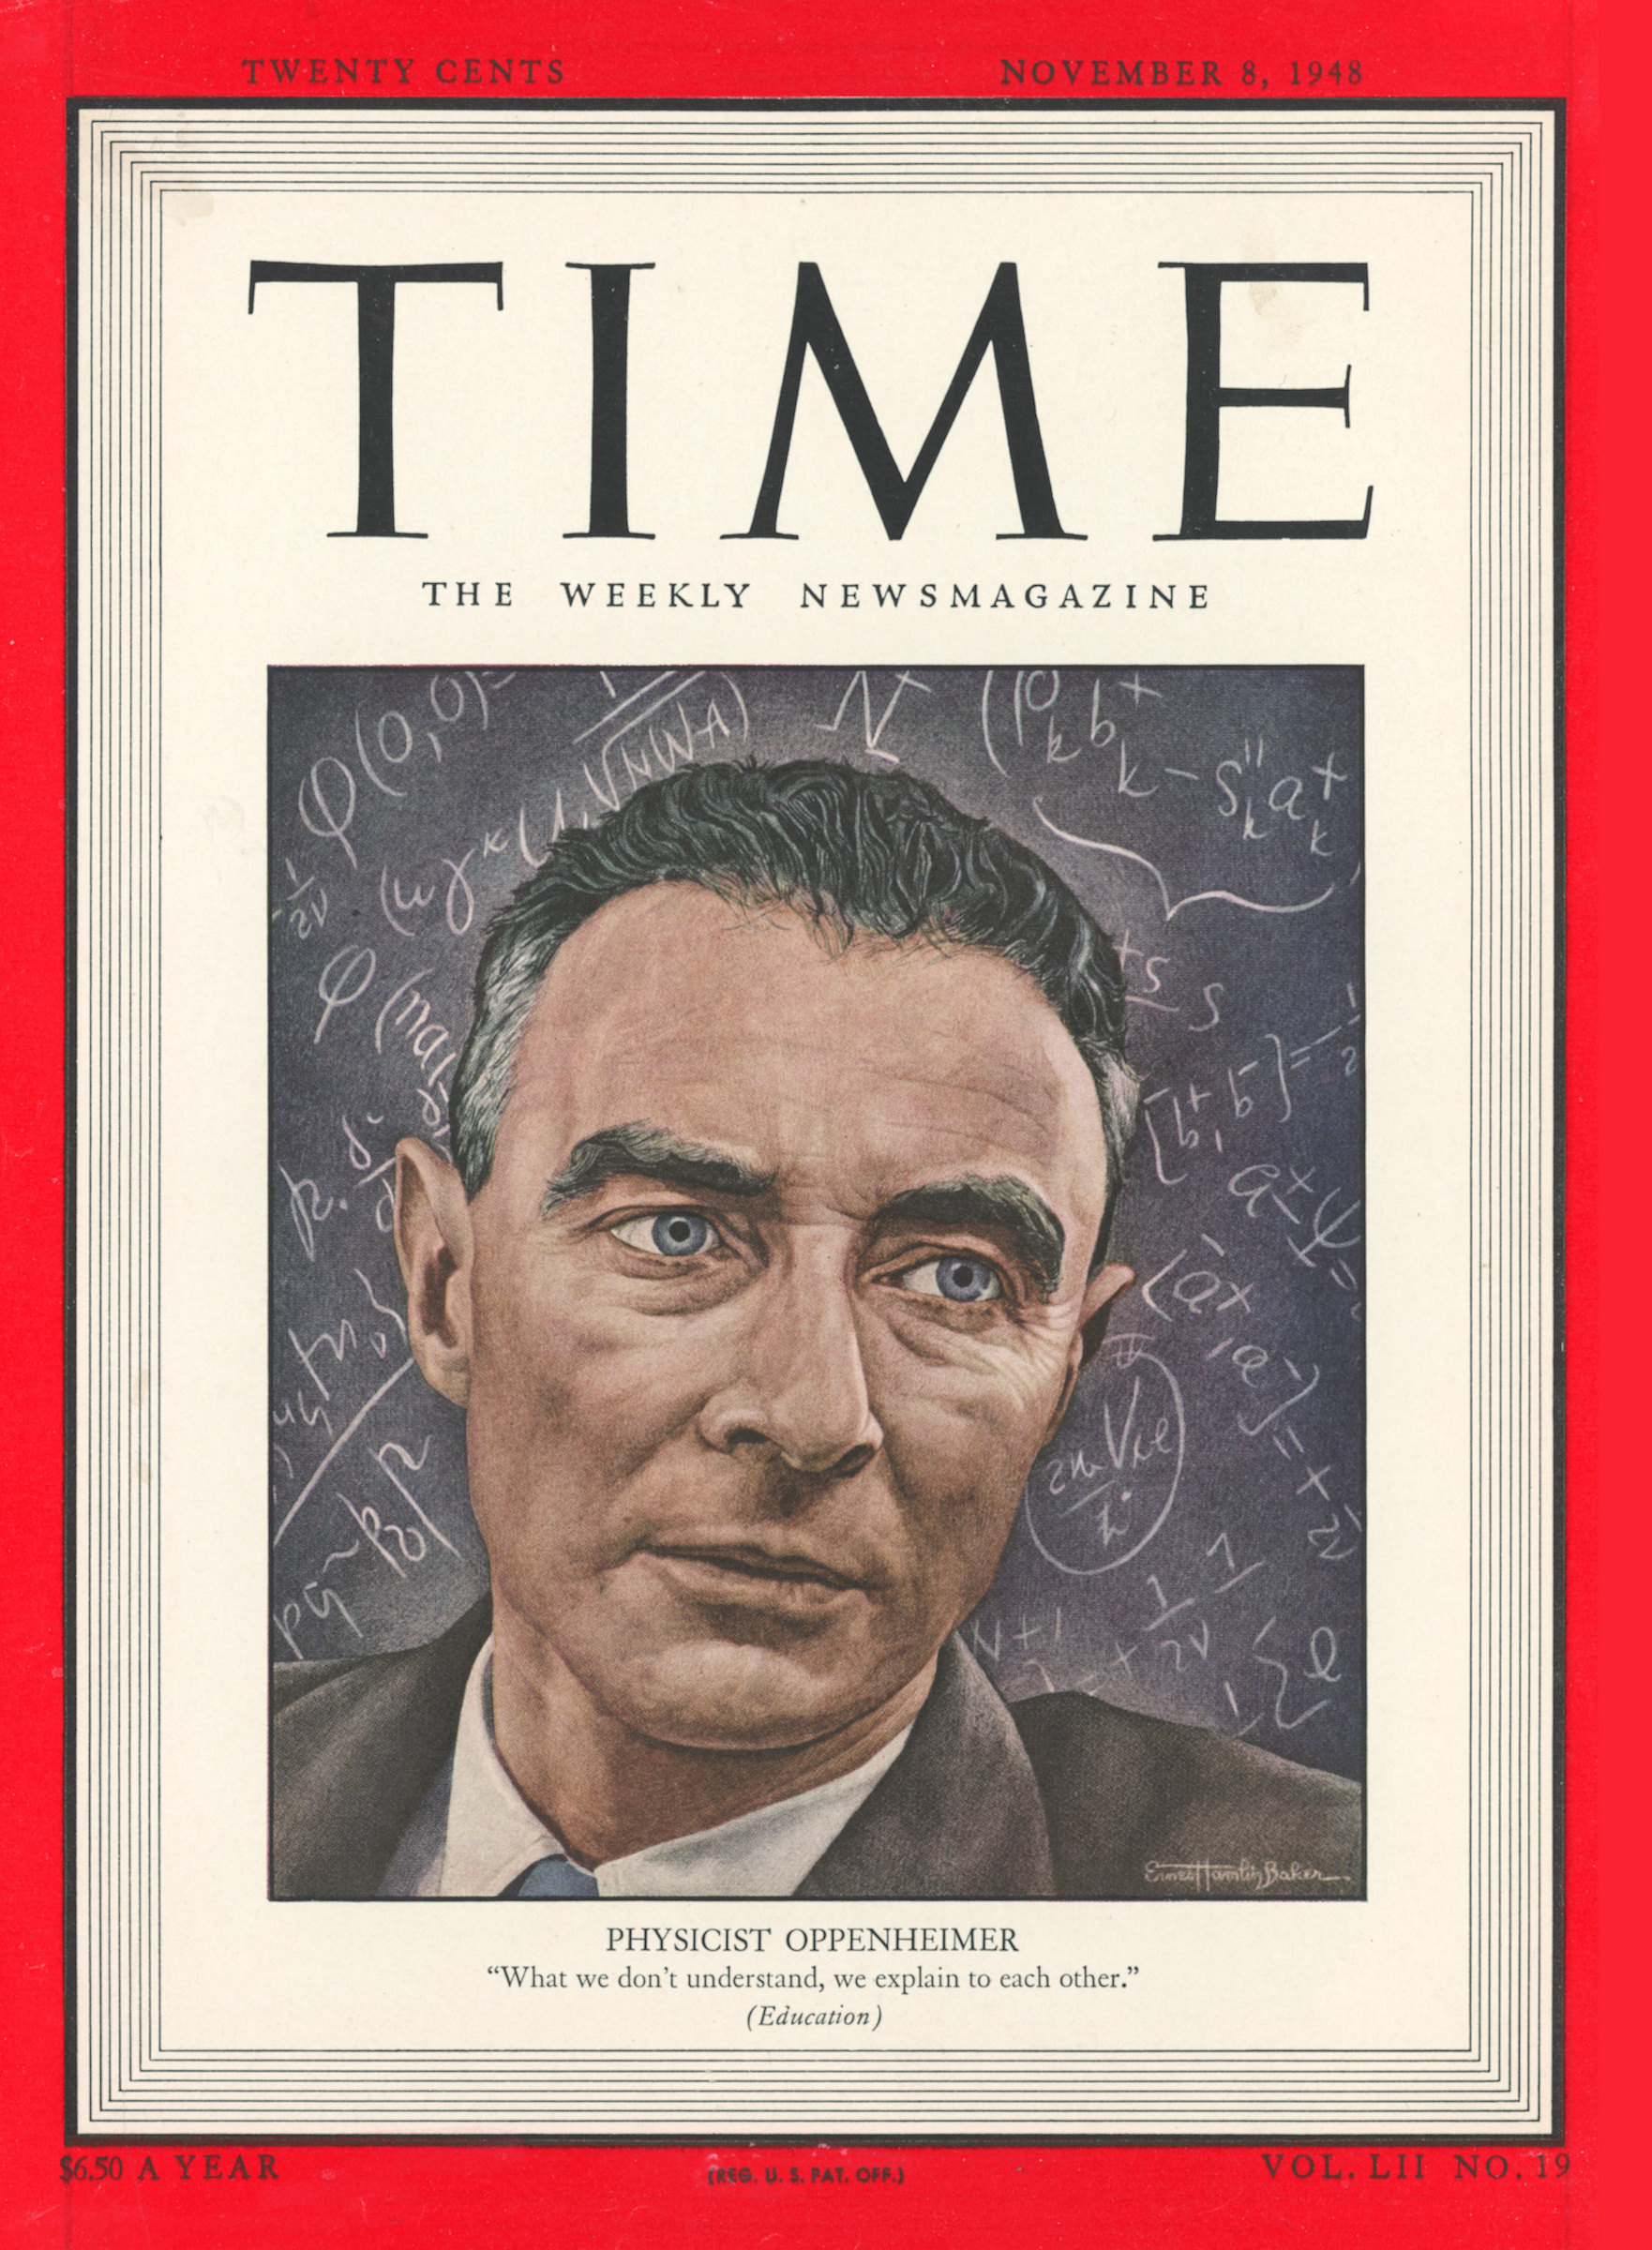 Real TIME magazine covers appear on Oppenheimer